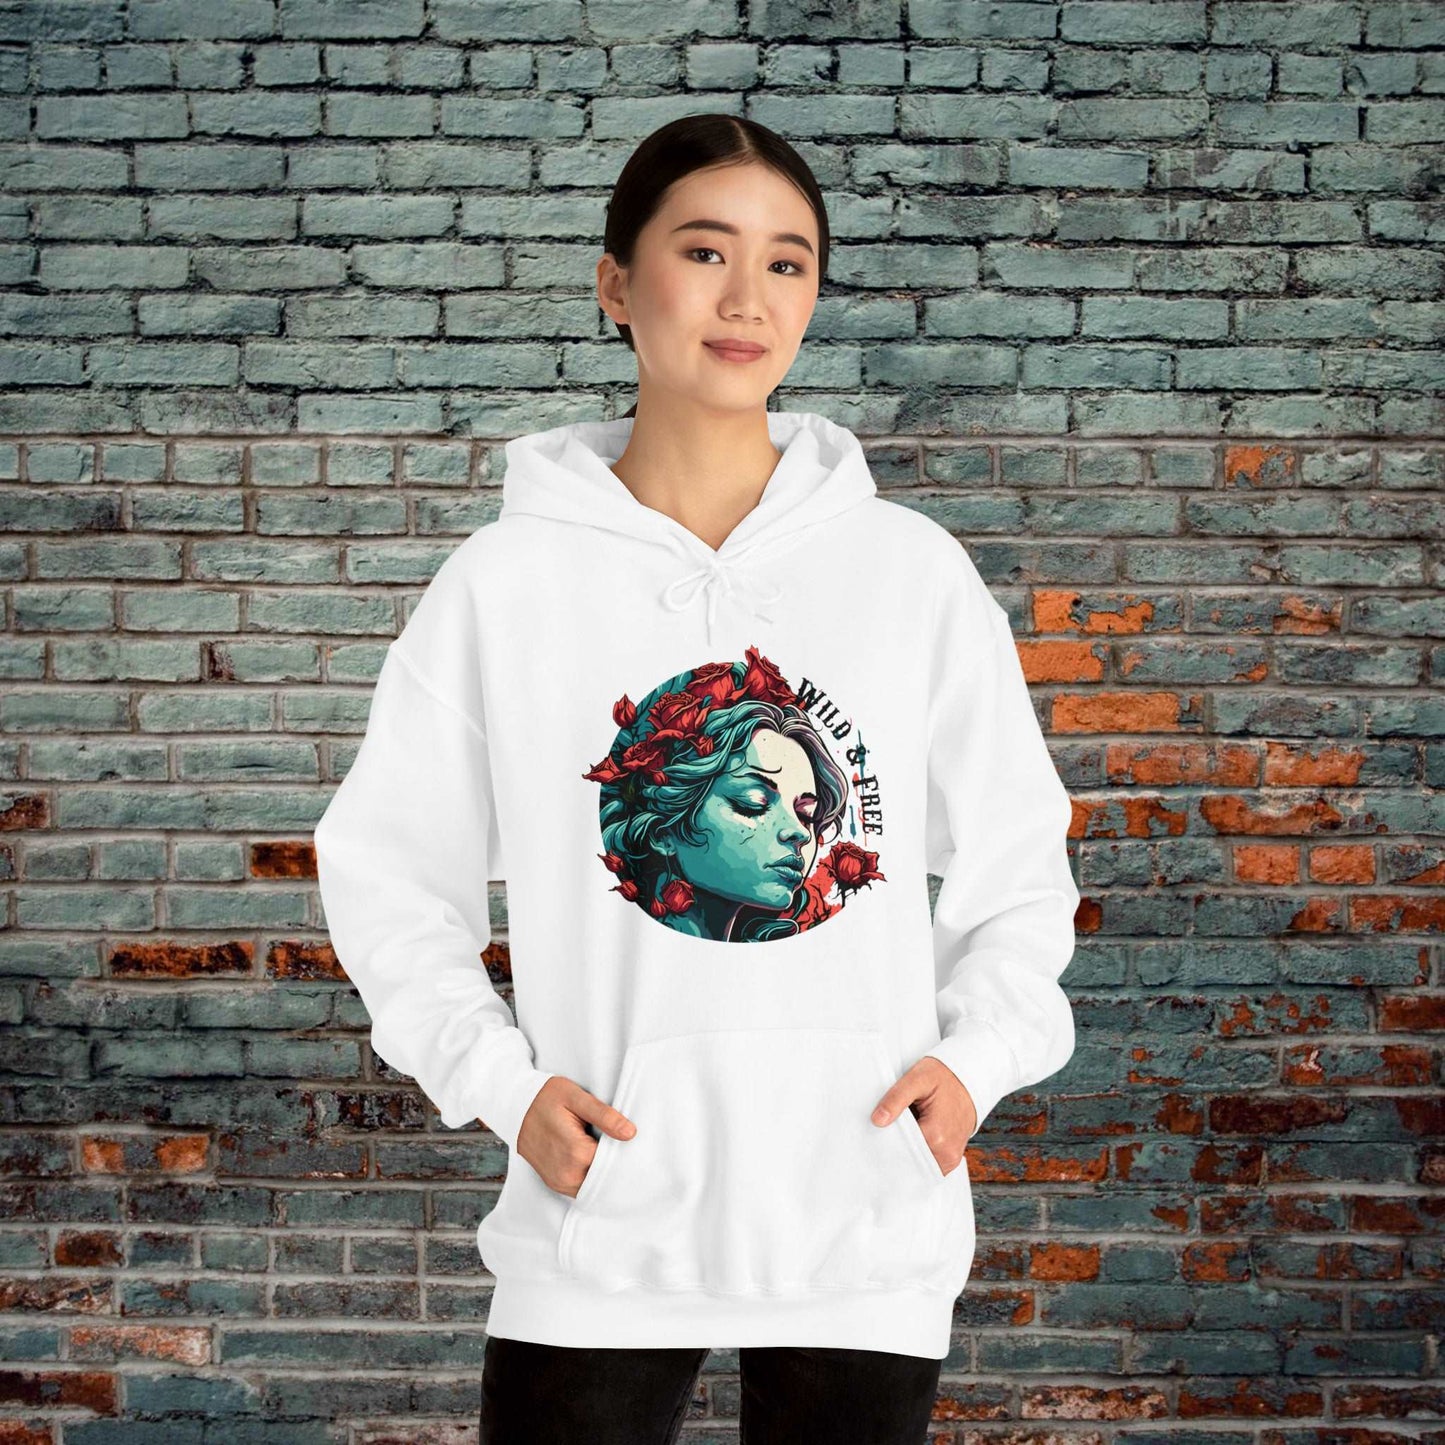 Wild & Free Hoodie from Fierce Fusion